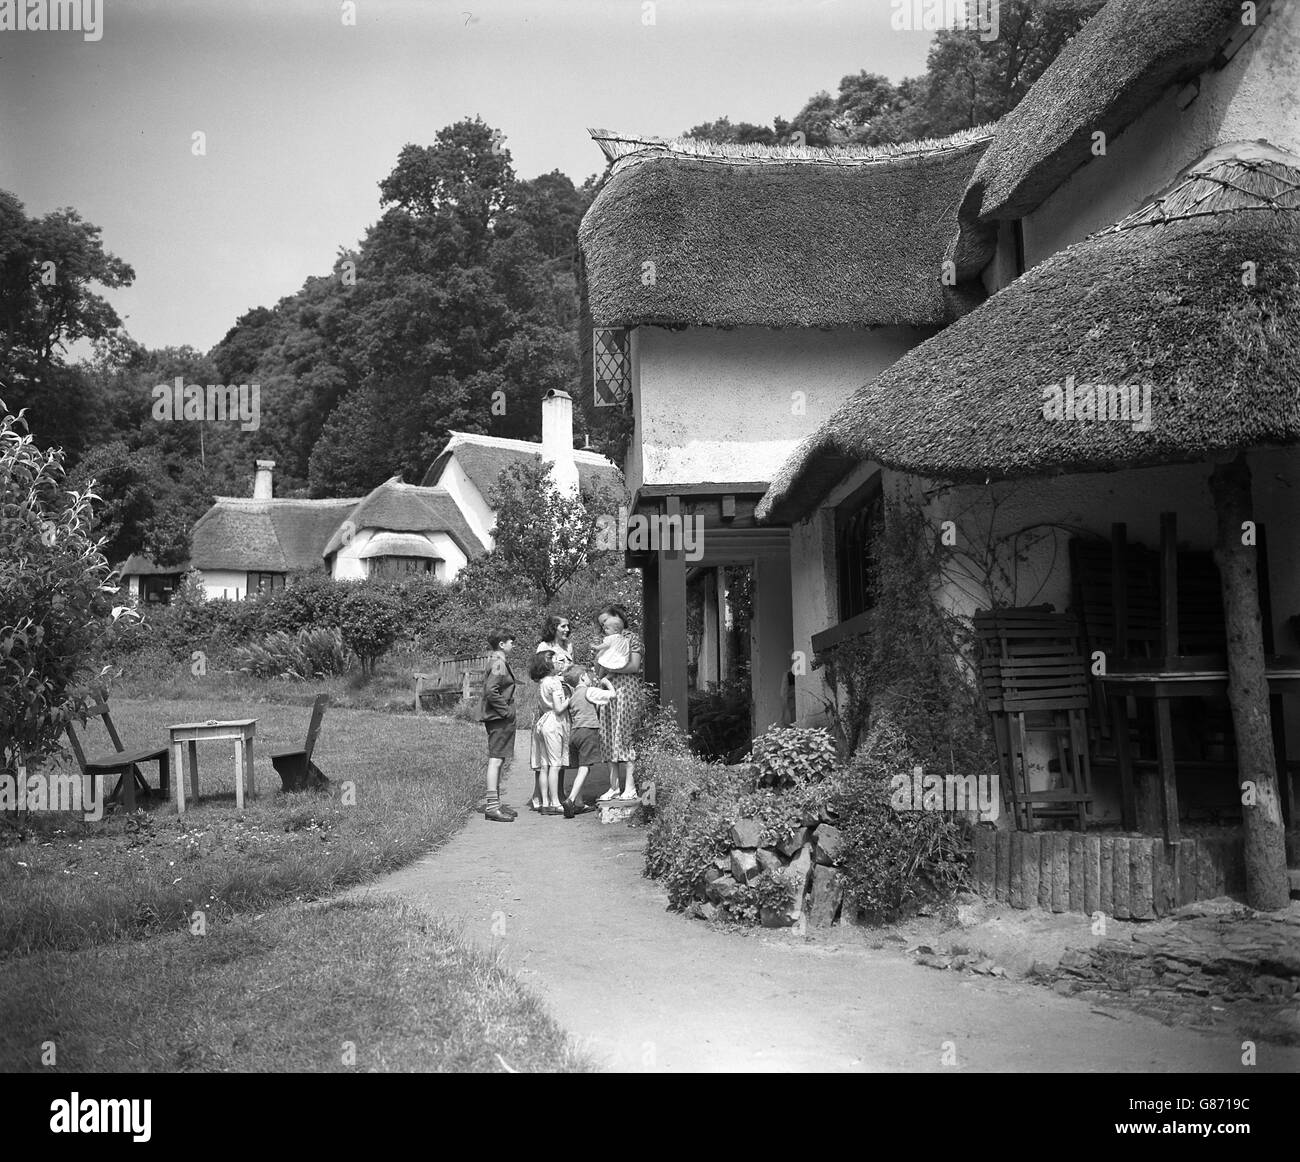 Thatched cottages in the village of Selworthy, Somerset, a place popular with tourists and artists. Stock Photo